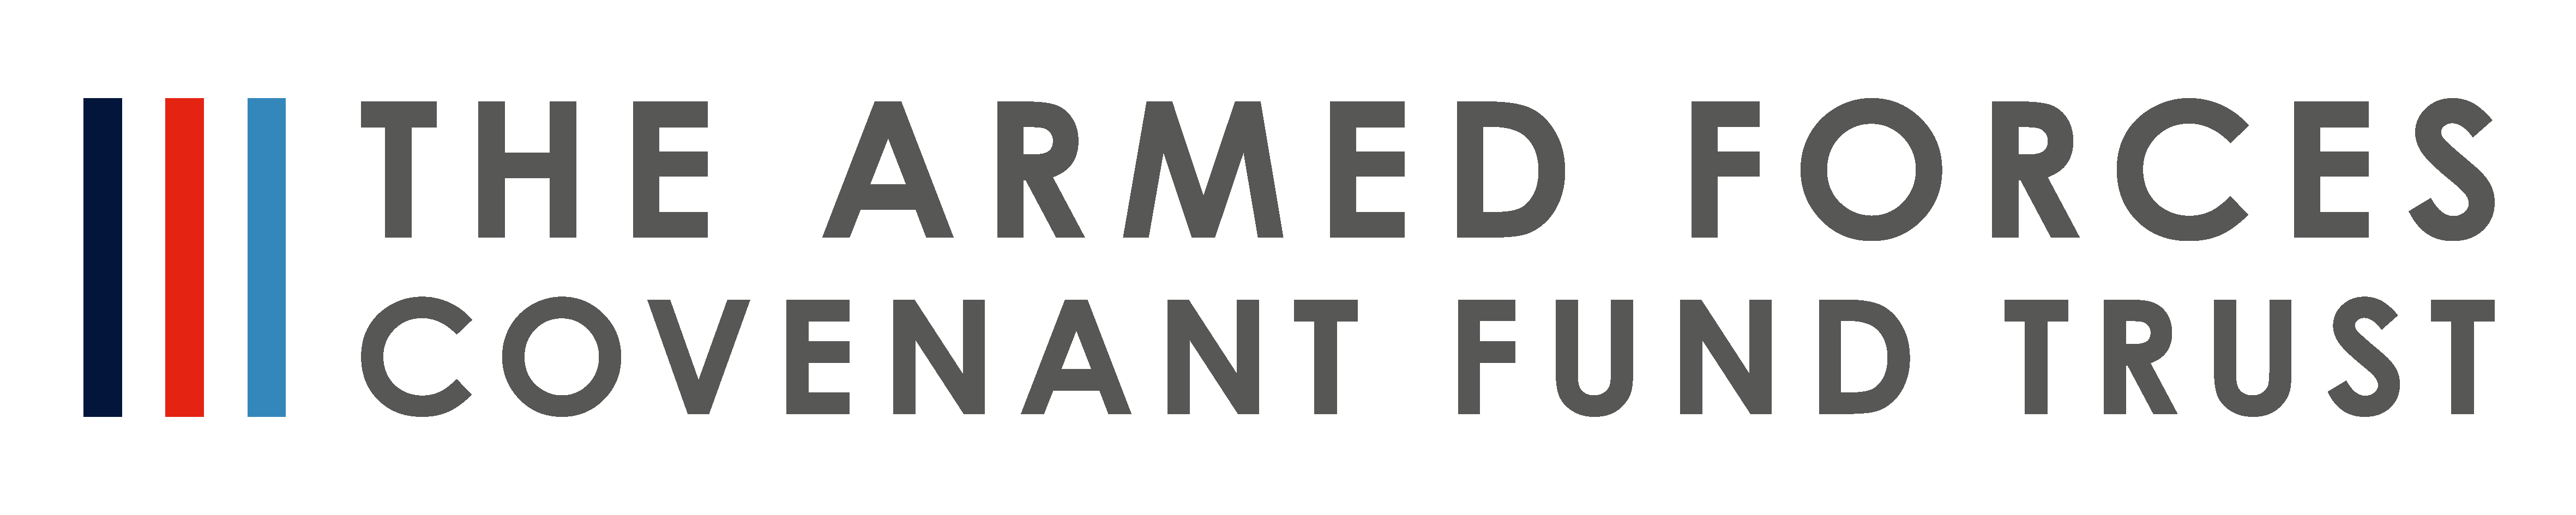 armed forces covenant fund trust